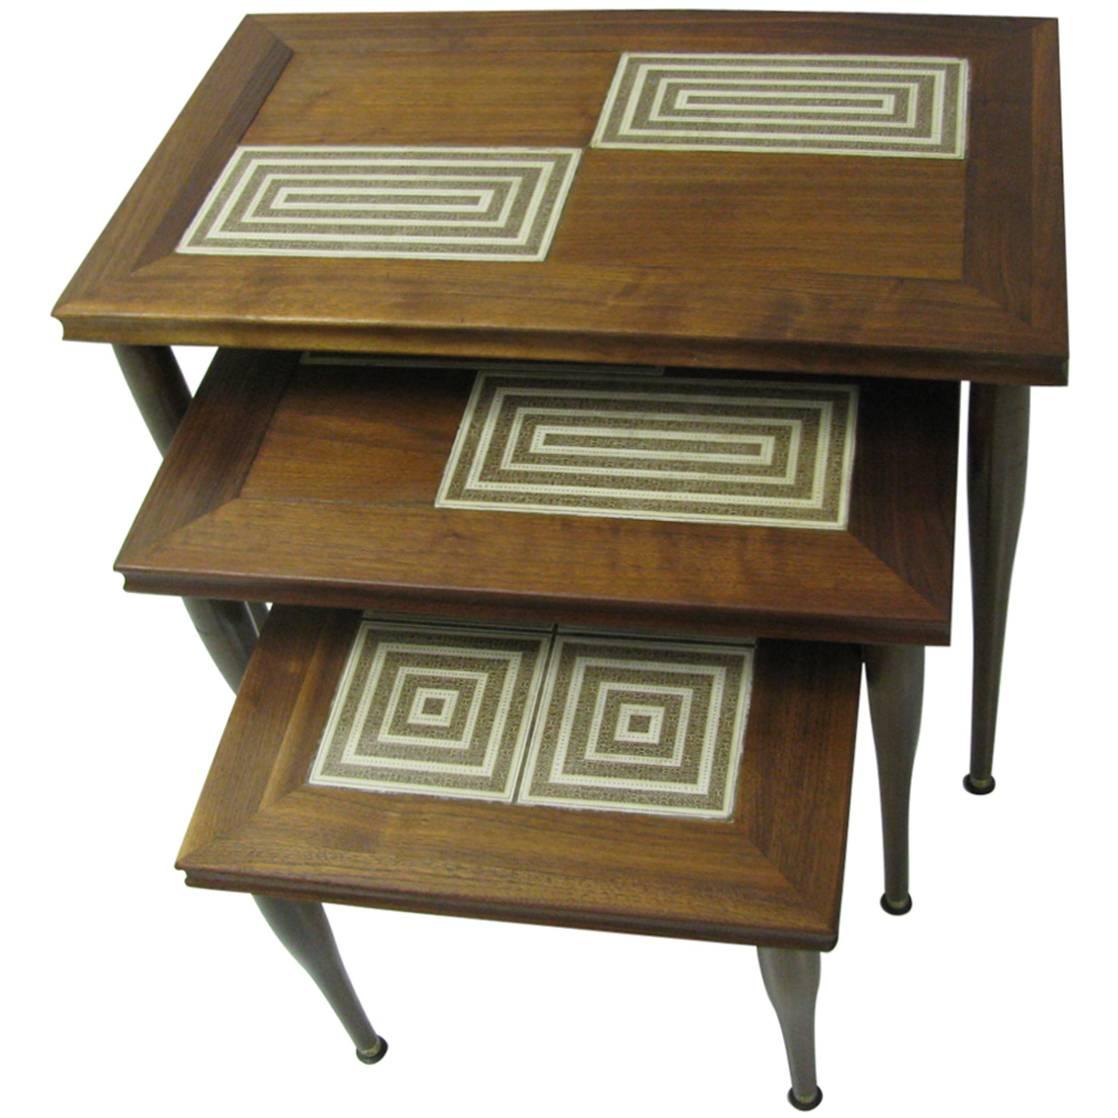 Mid-Century Modern Tile Top Stack Nesting Tables